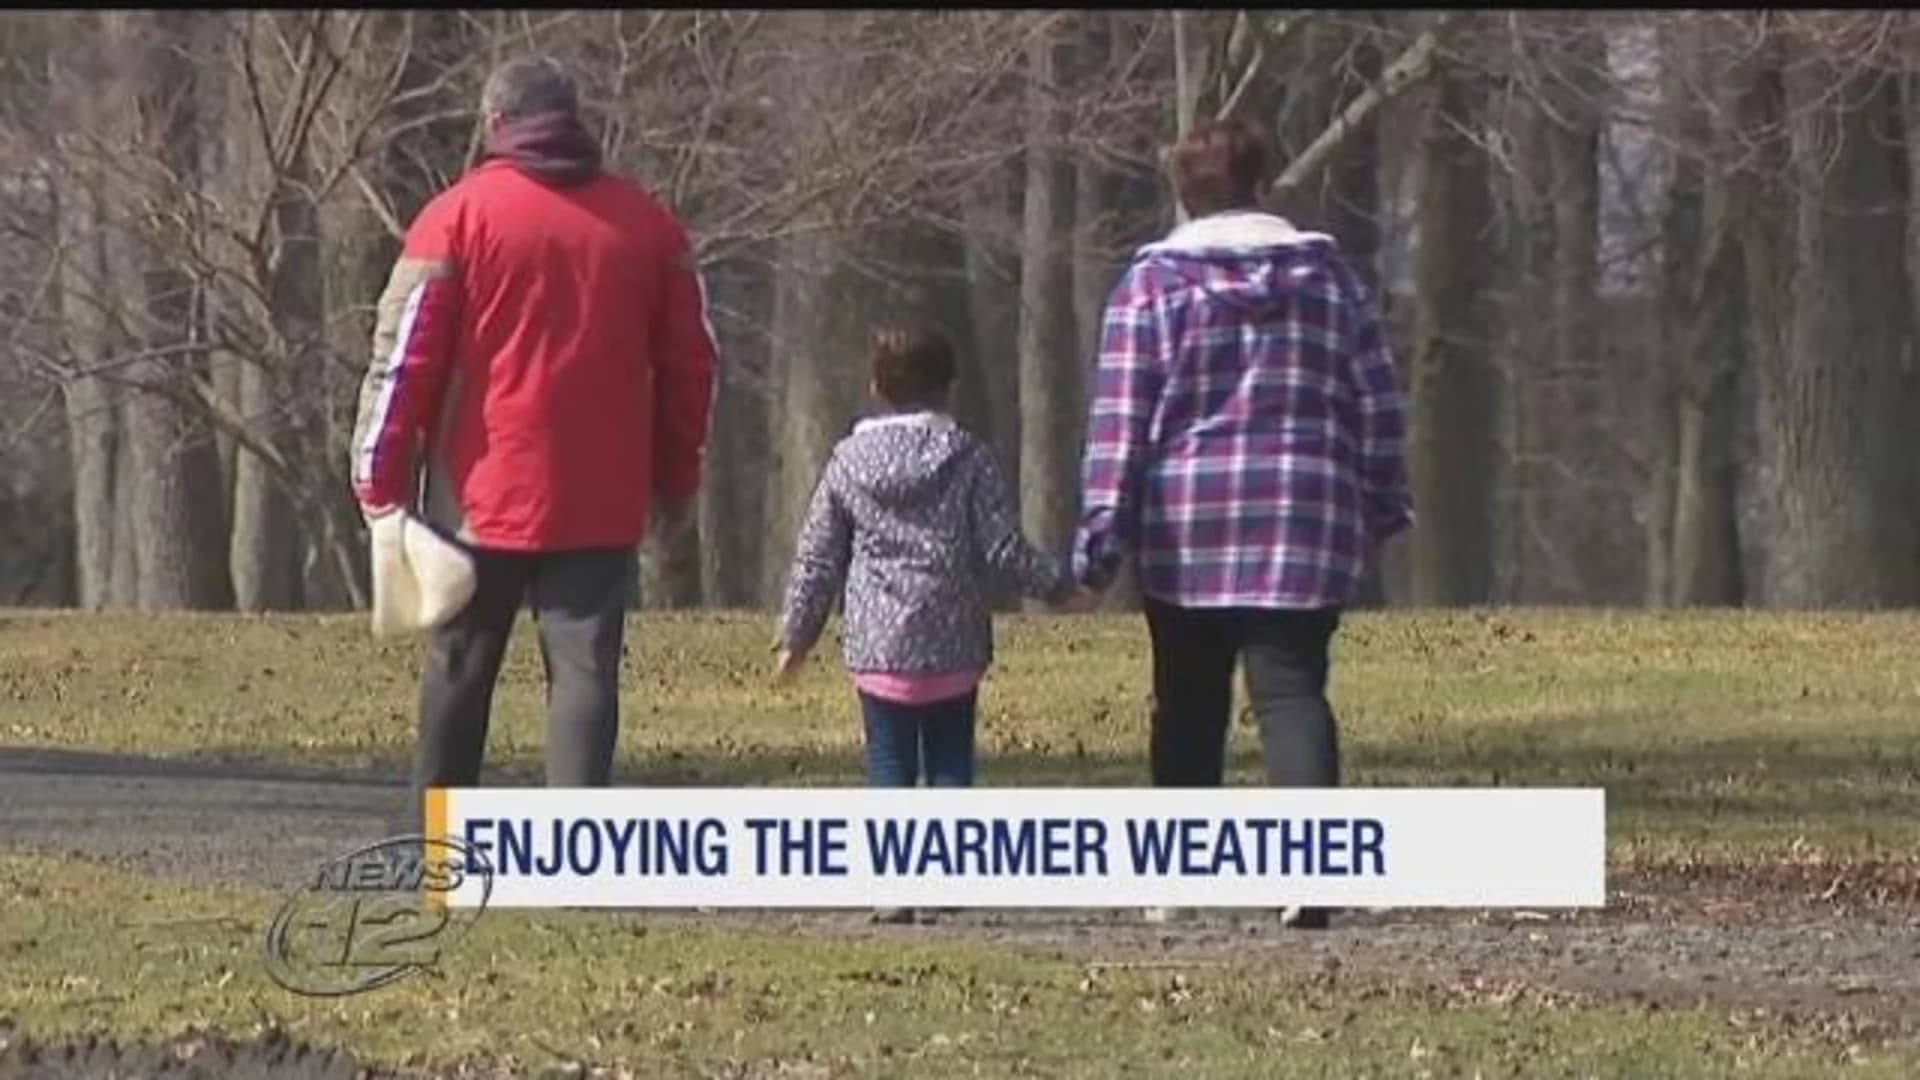 Warm weather brings families out to NJ parks